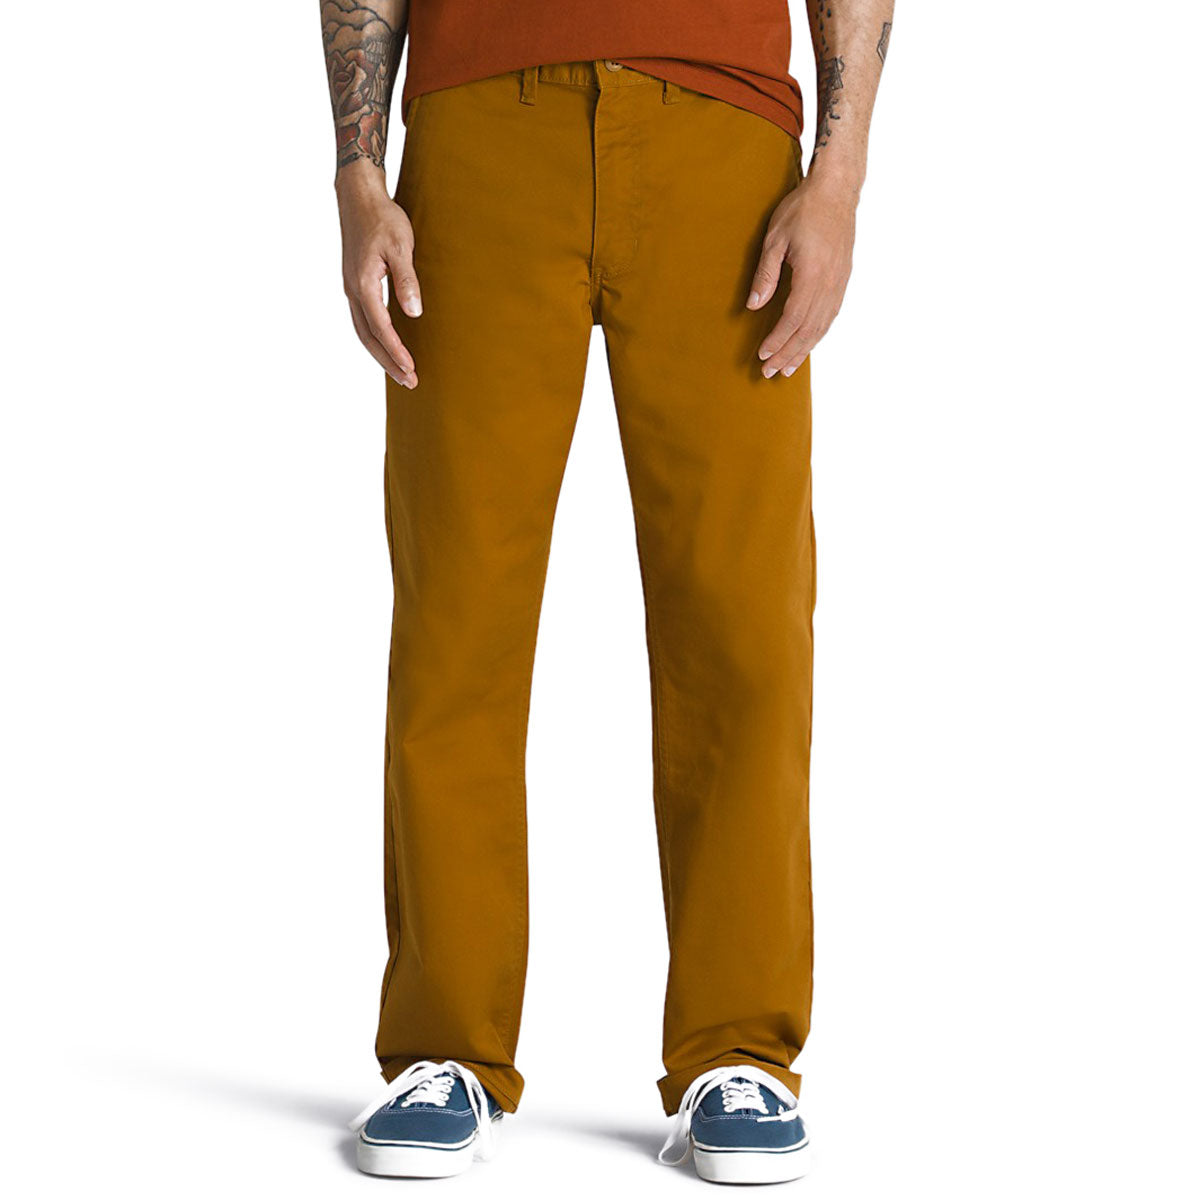 Vans Authentic Chino Relaxed Pants - Fatal Floral Golden Brown image 5